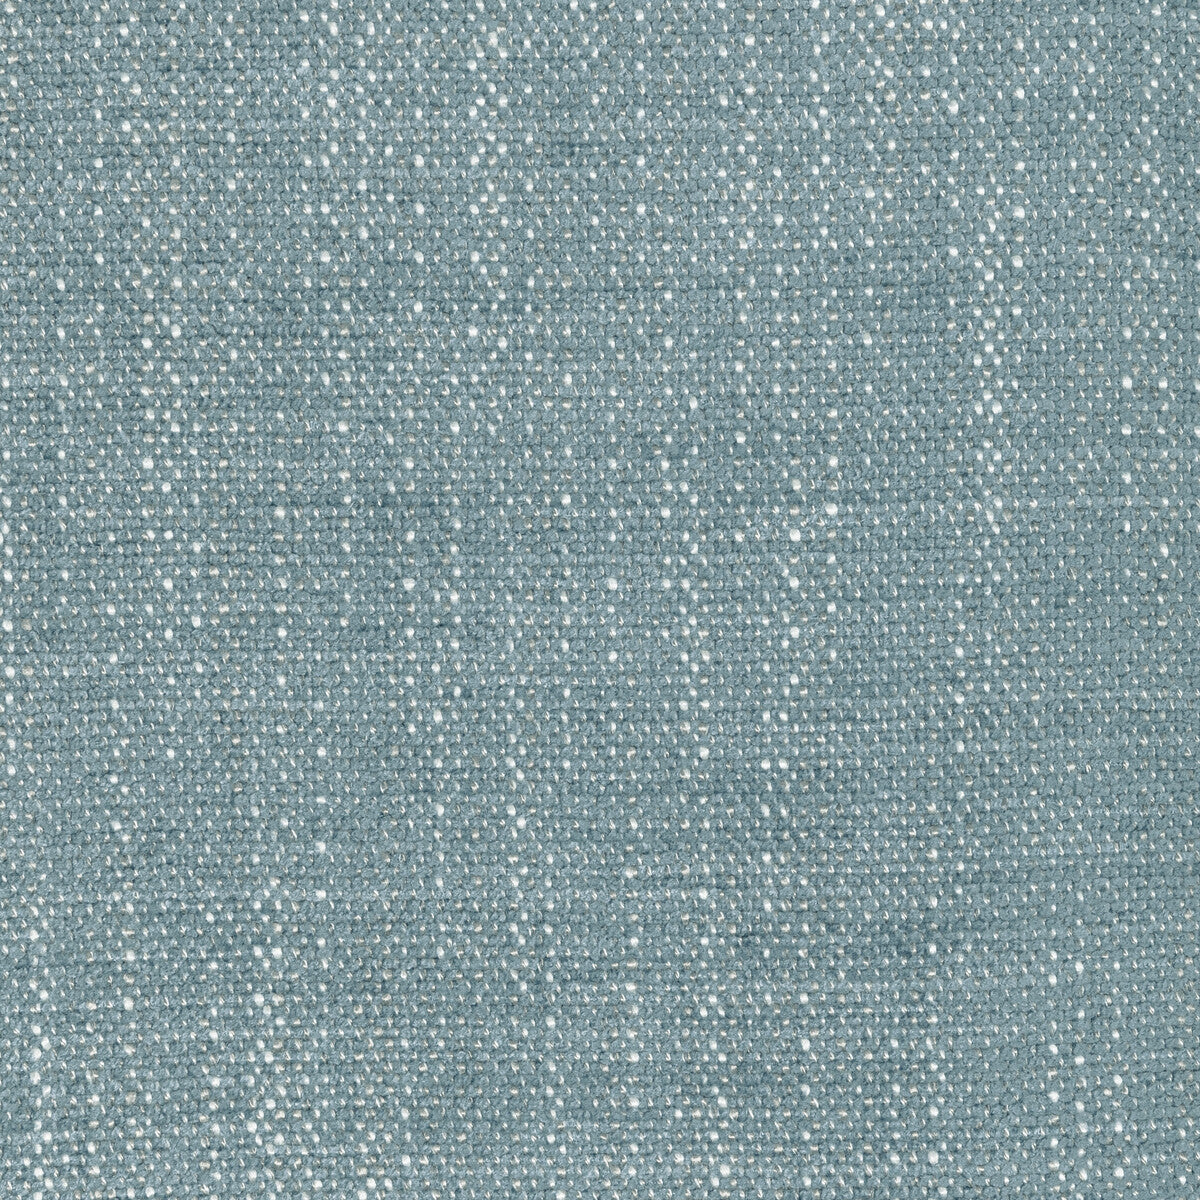 Kravet Couture fabric in 36597-15 color - pattern 36597.15.0 - by Kravet Couture in the Mabley Handler collection